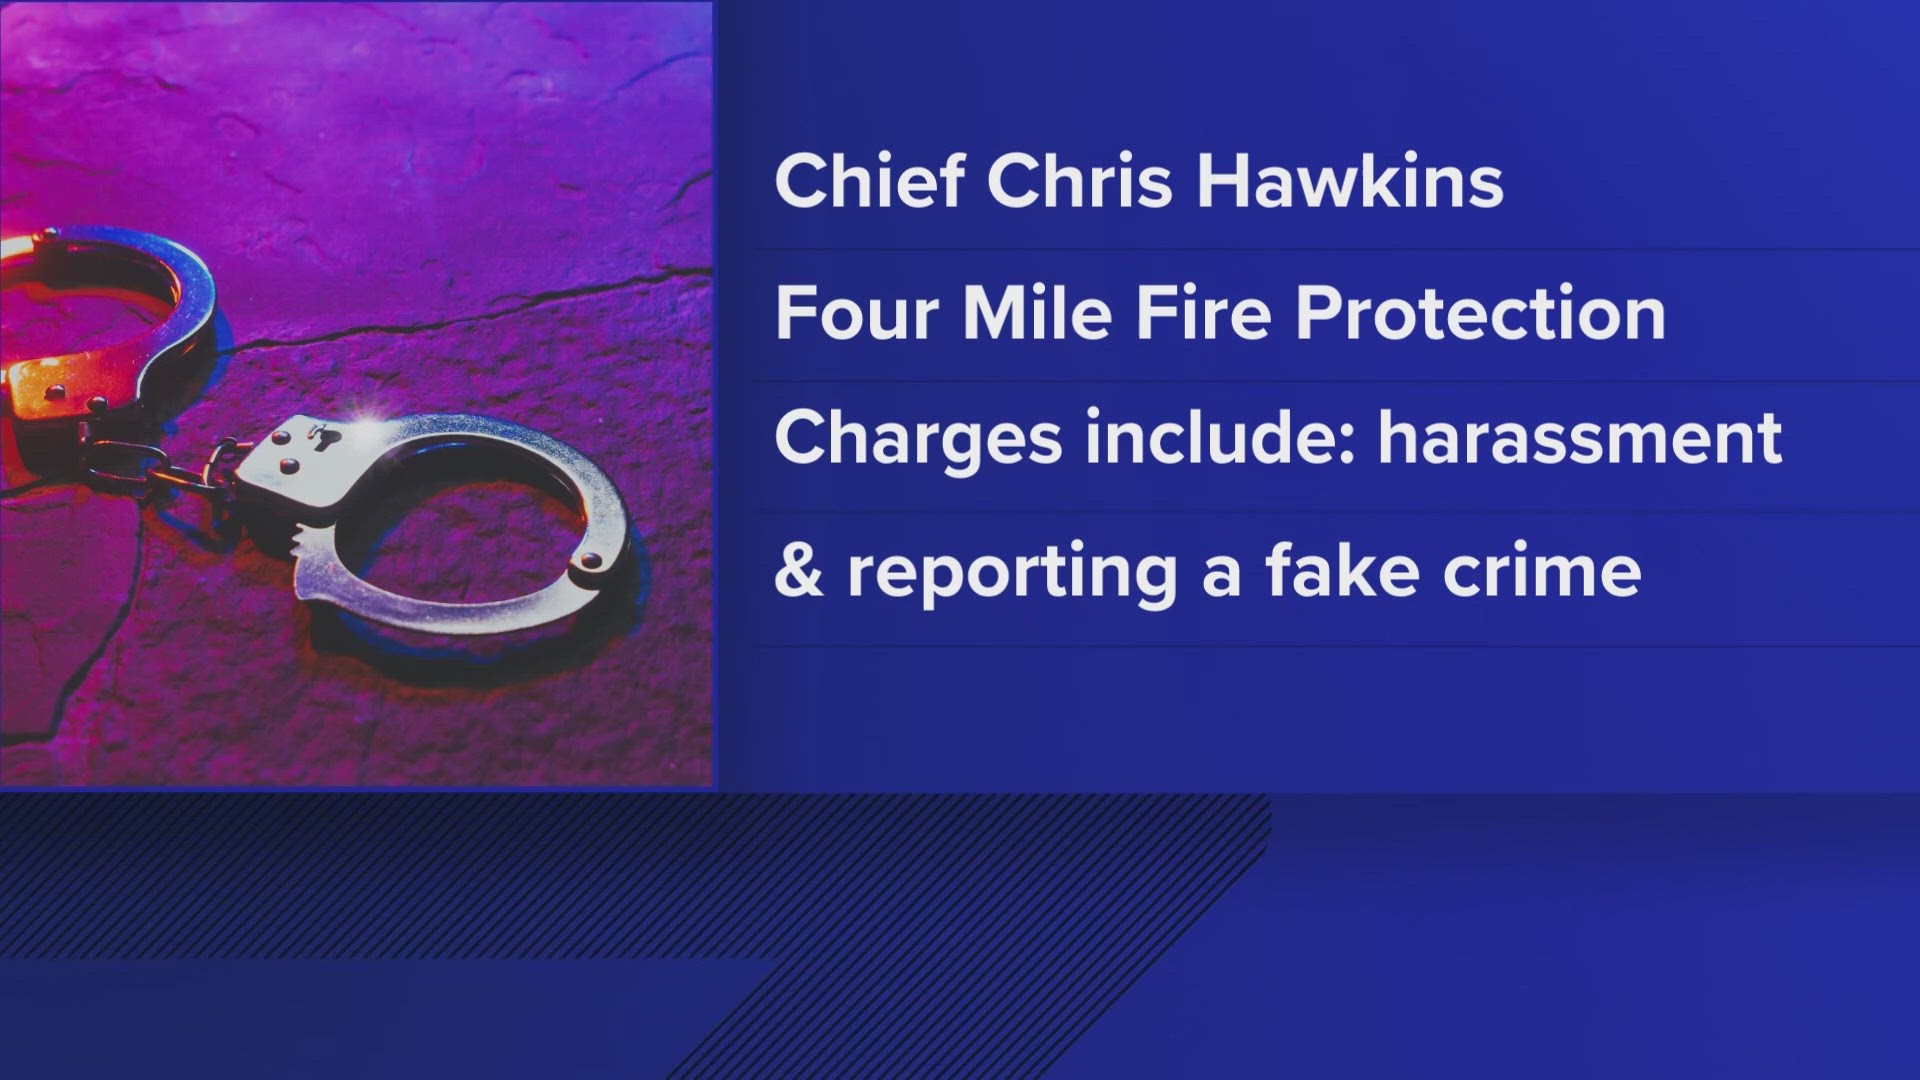 Chris Hawkins, 41, was arrested on domestic violence charges last week.